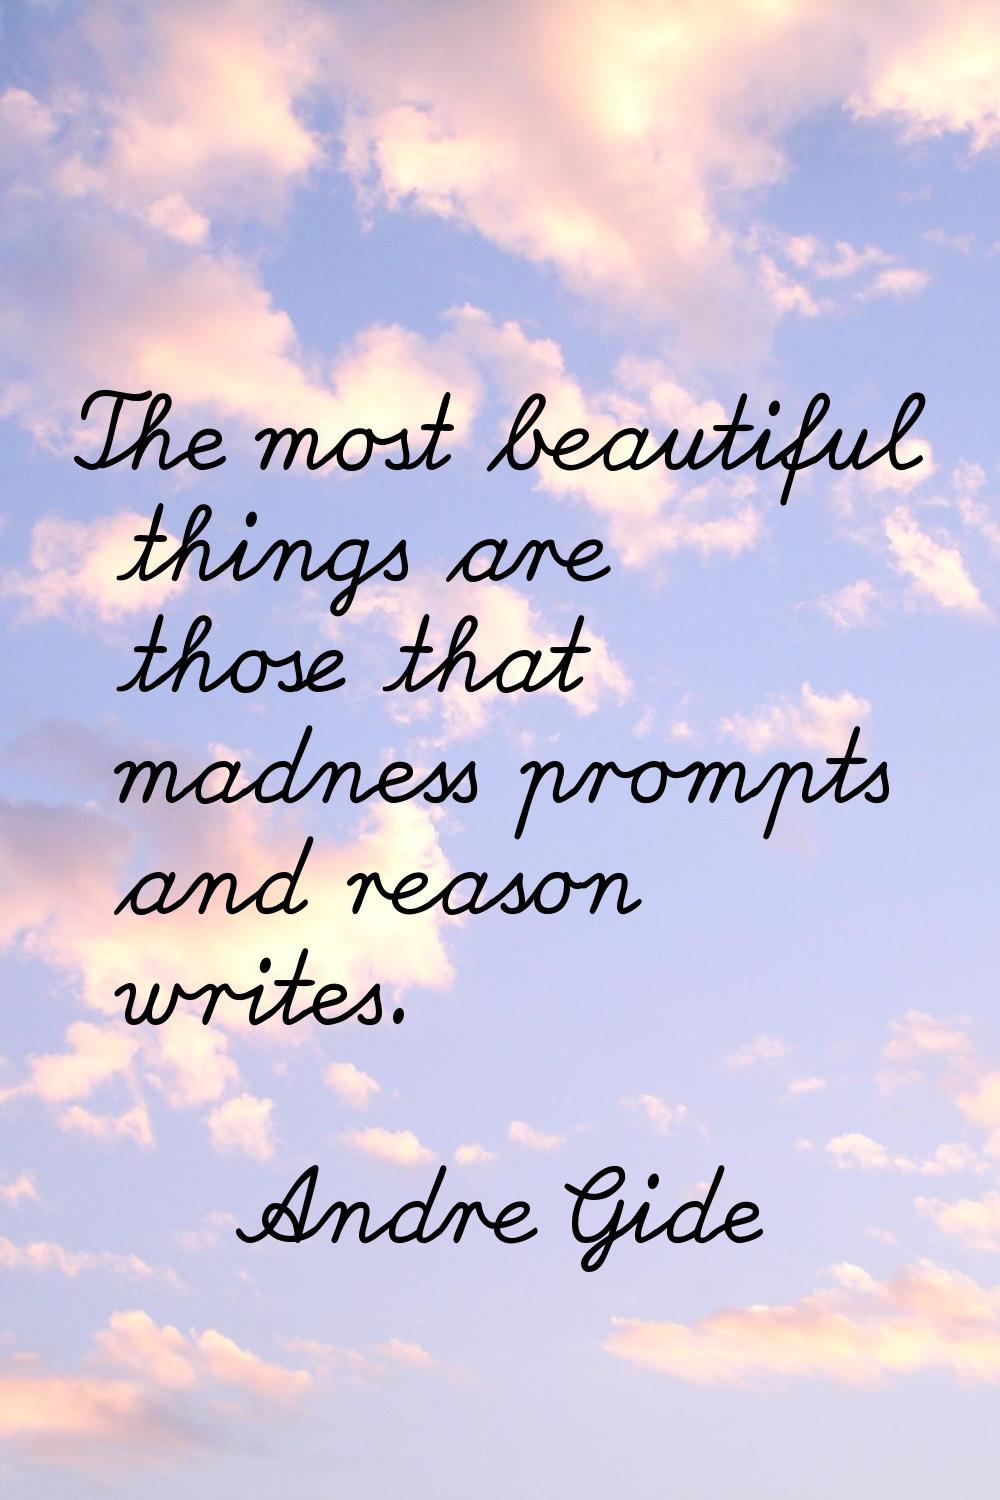 The most beautiful things are those that madness prompts and reason writes.